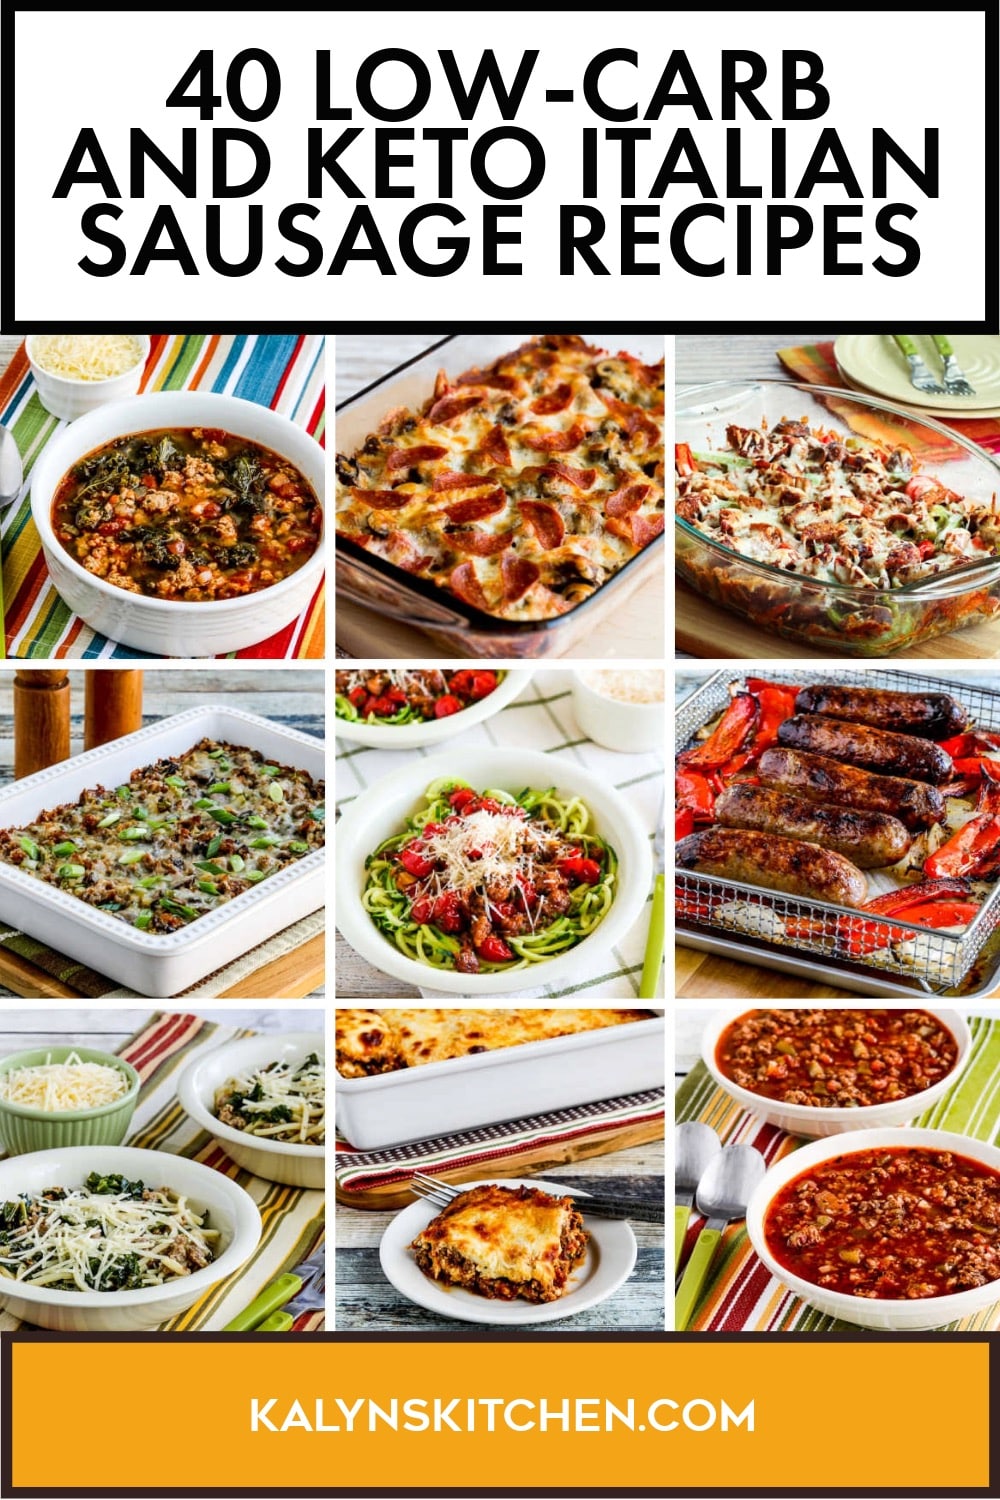 Pinterest image of 40 Low-Carb and Keto Italian Sausage Recipes